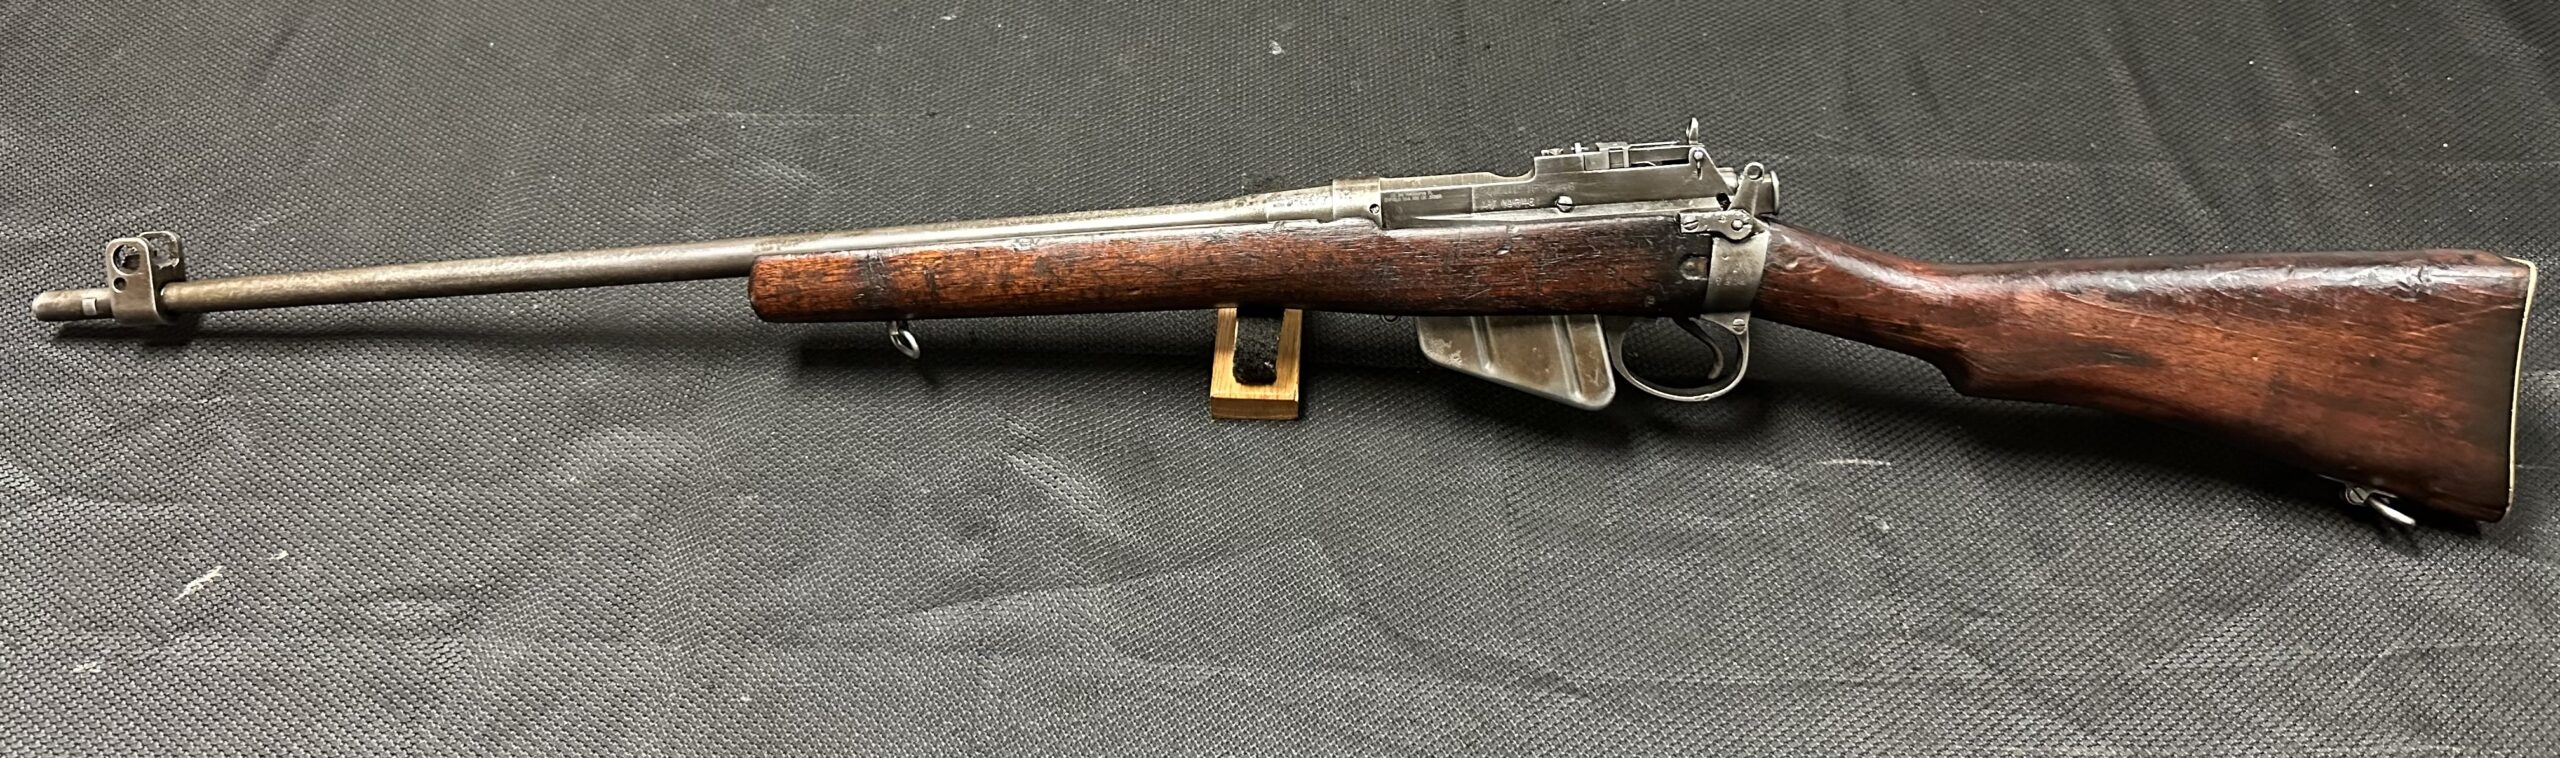 1943 Sporterized Enfield No 4 Mk 1, Serial Number 19043 – Royal